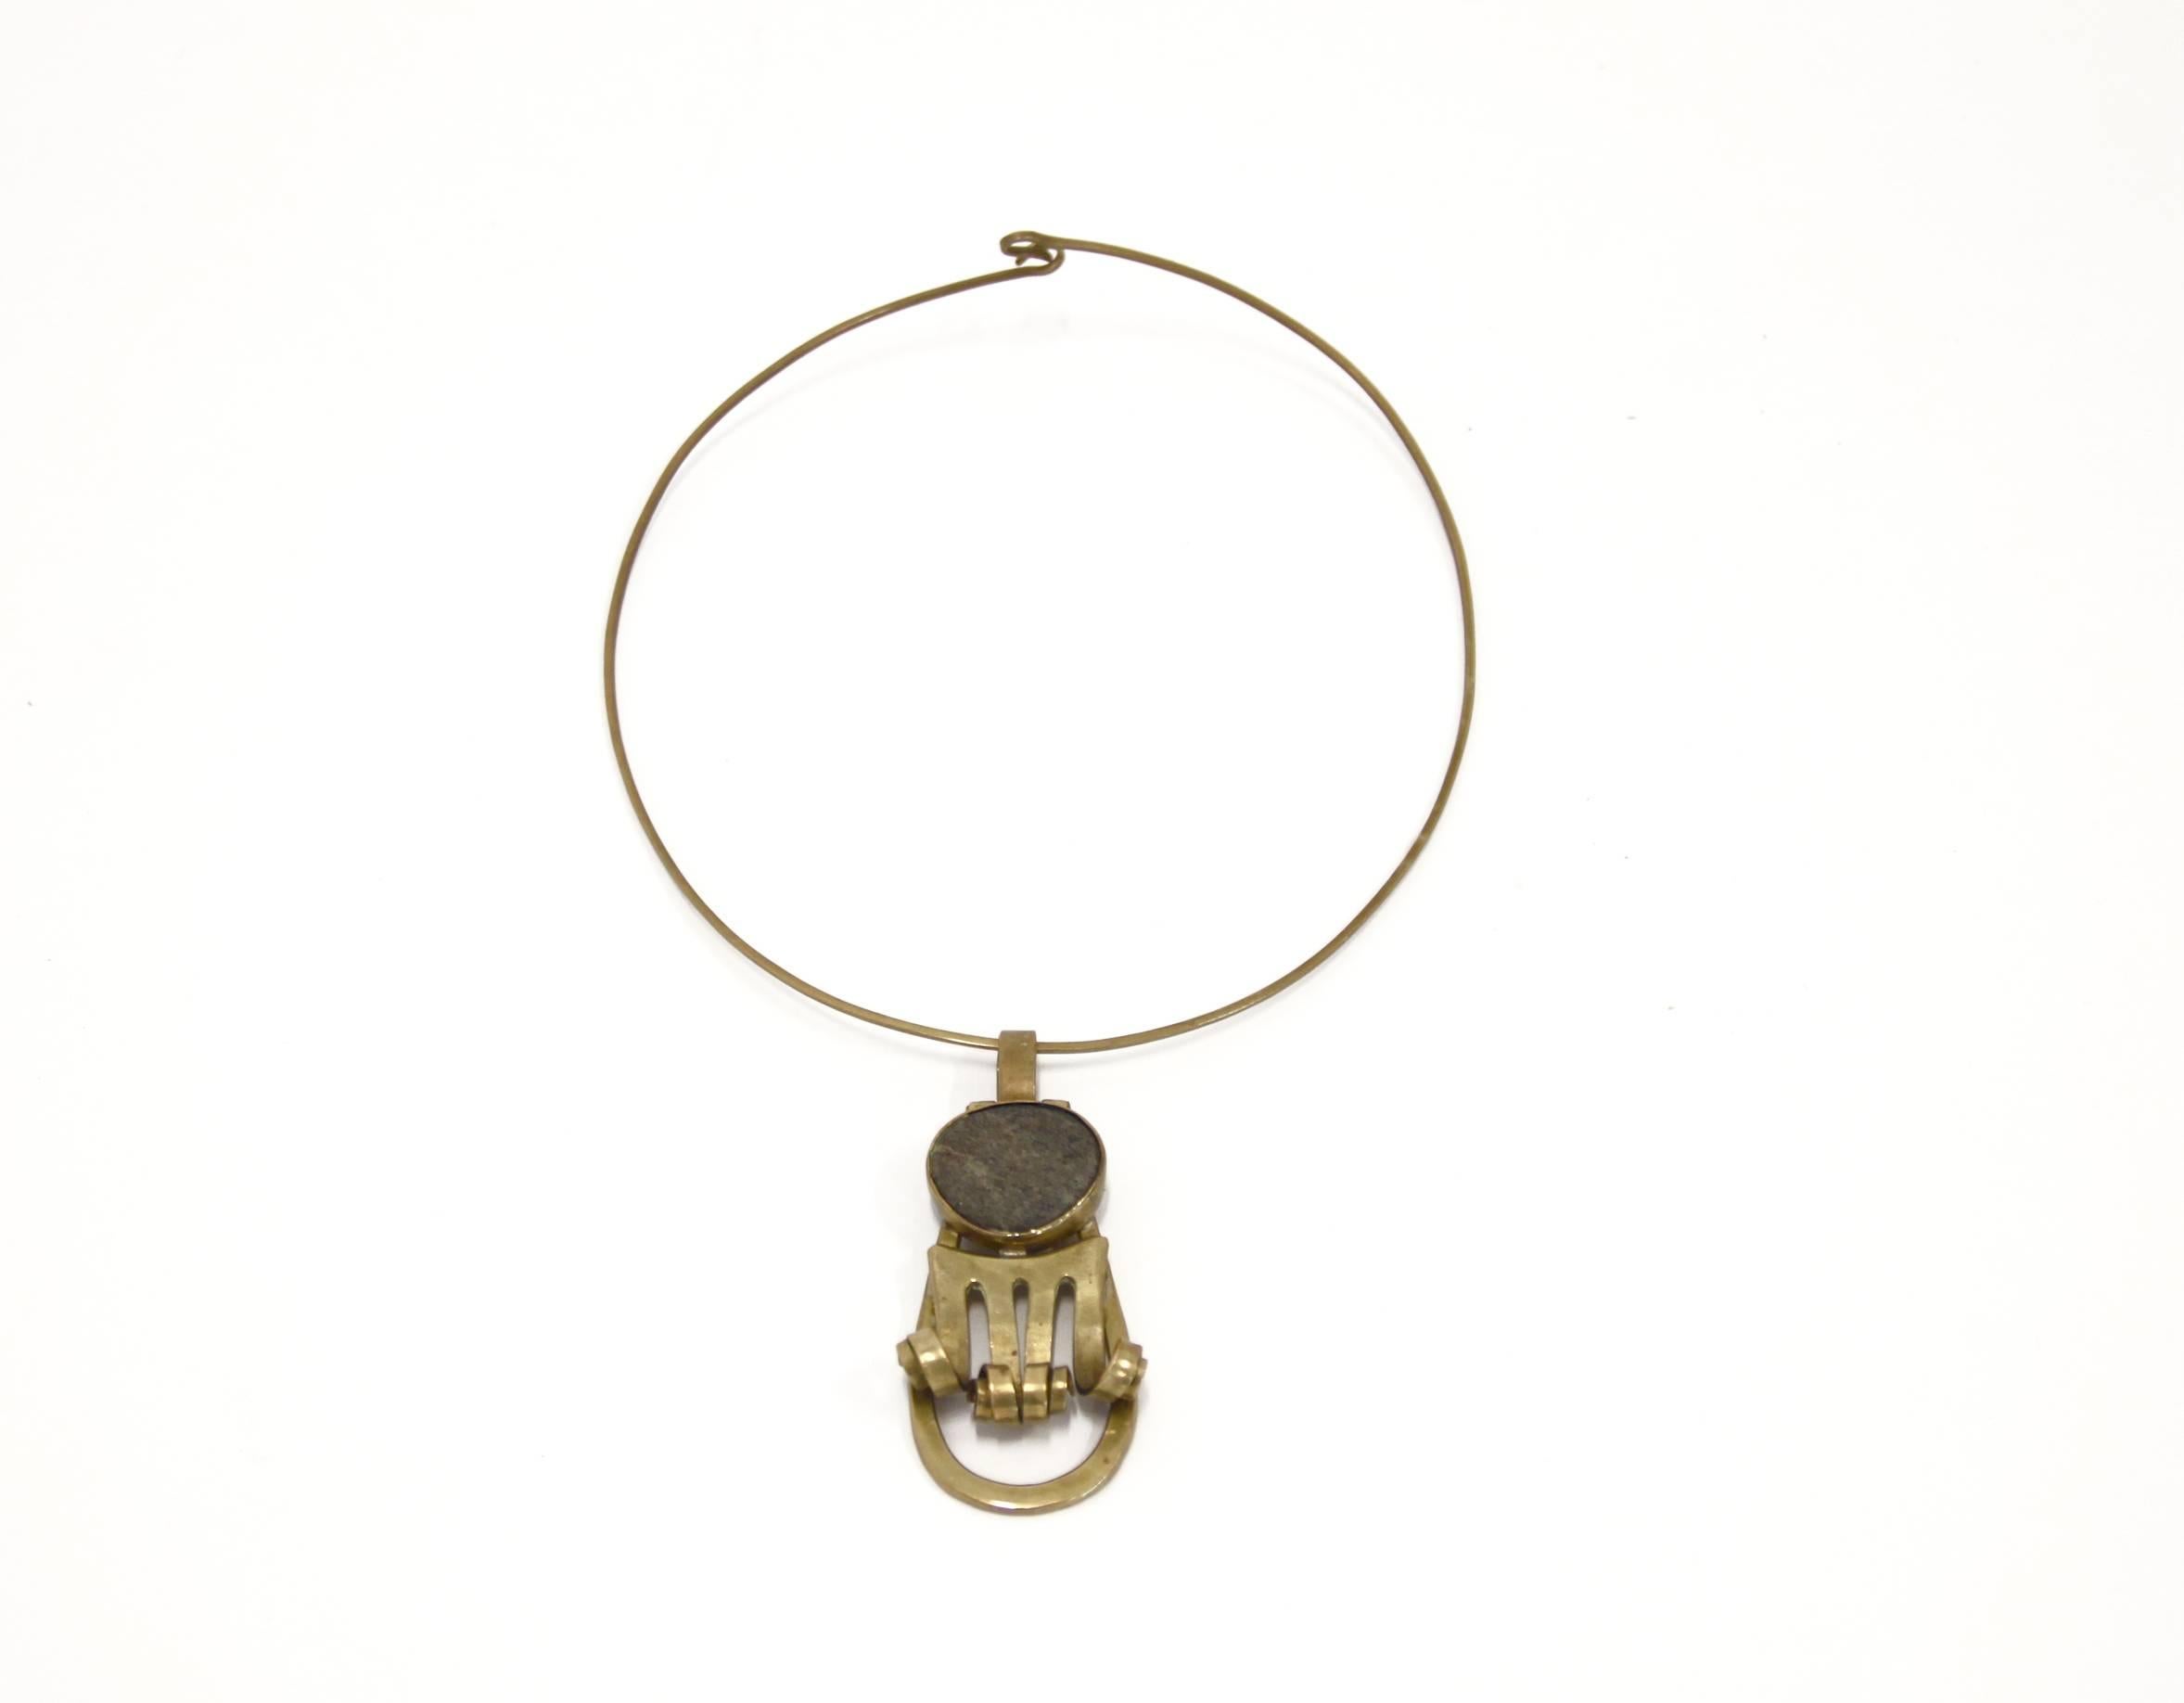 Incredibly rare studio necklace by modernist jeweler Anna Greta Eker. The necklace is beautifully sculptured in brass with a Norwegian mountain stone. Eker's intense and modernist expression is minimalist yet highly structured. Eker was inspired by